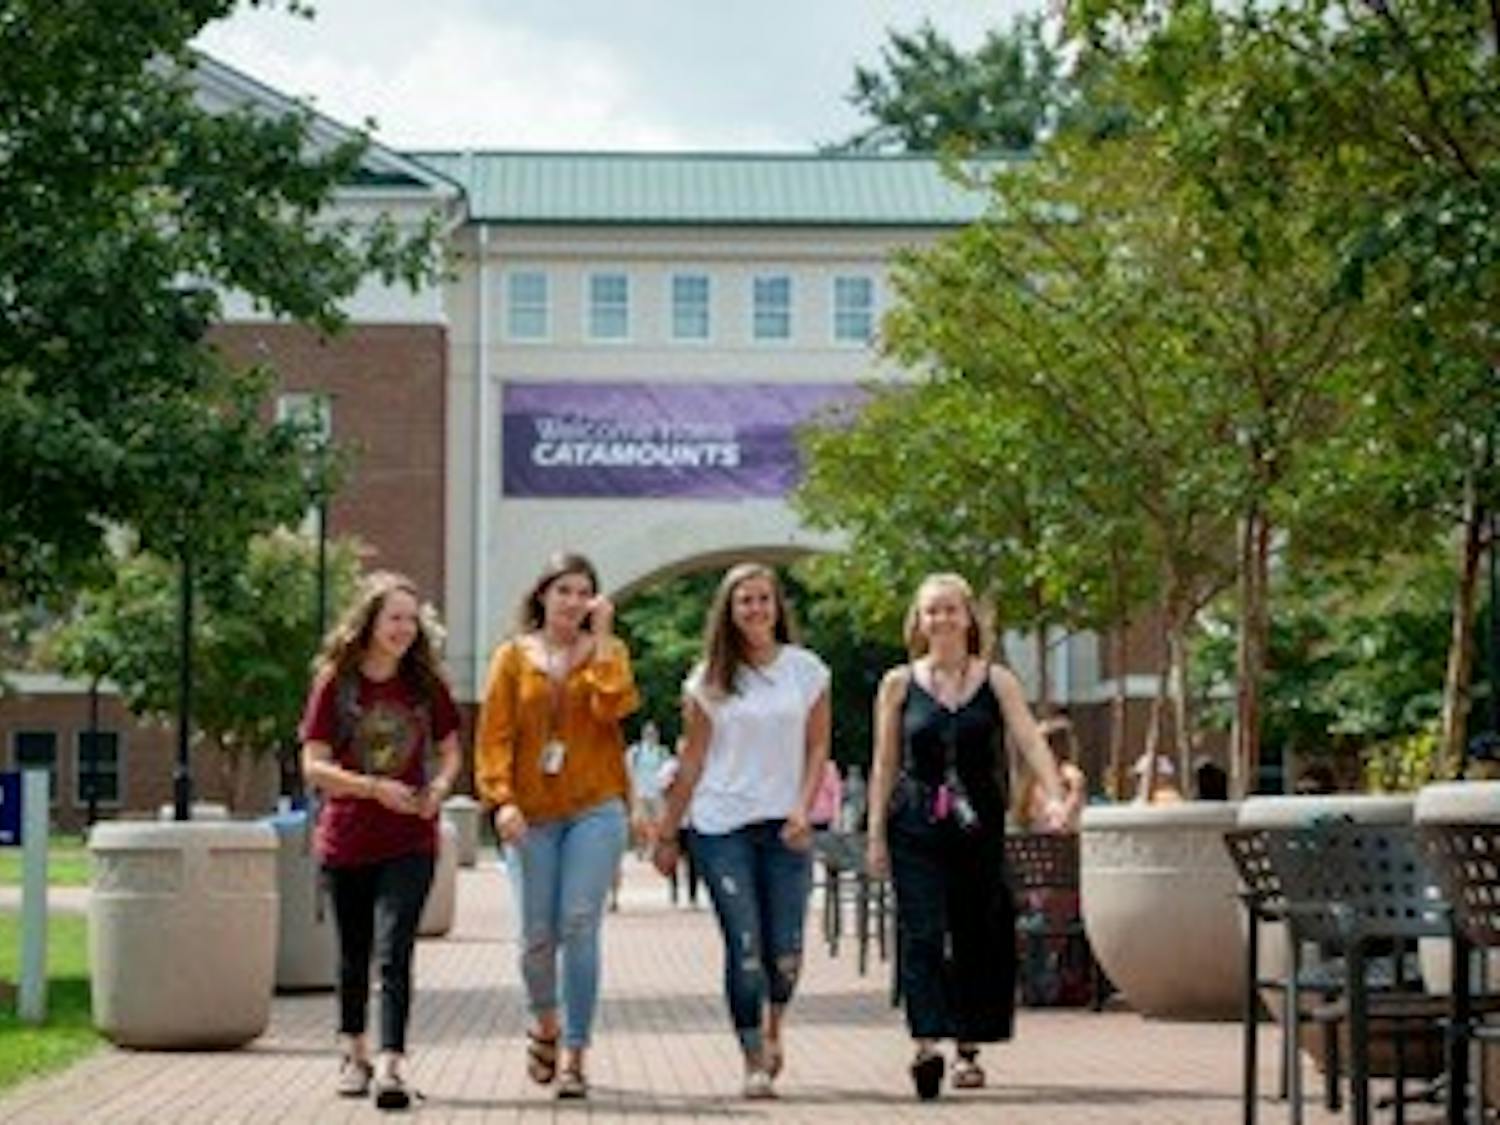 Photo courtesy of Ashley Evans.
Western Carolina University welcomes the class of 2022, which is the first to benefit from the NC Promise Plan.